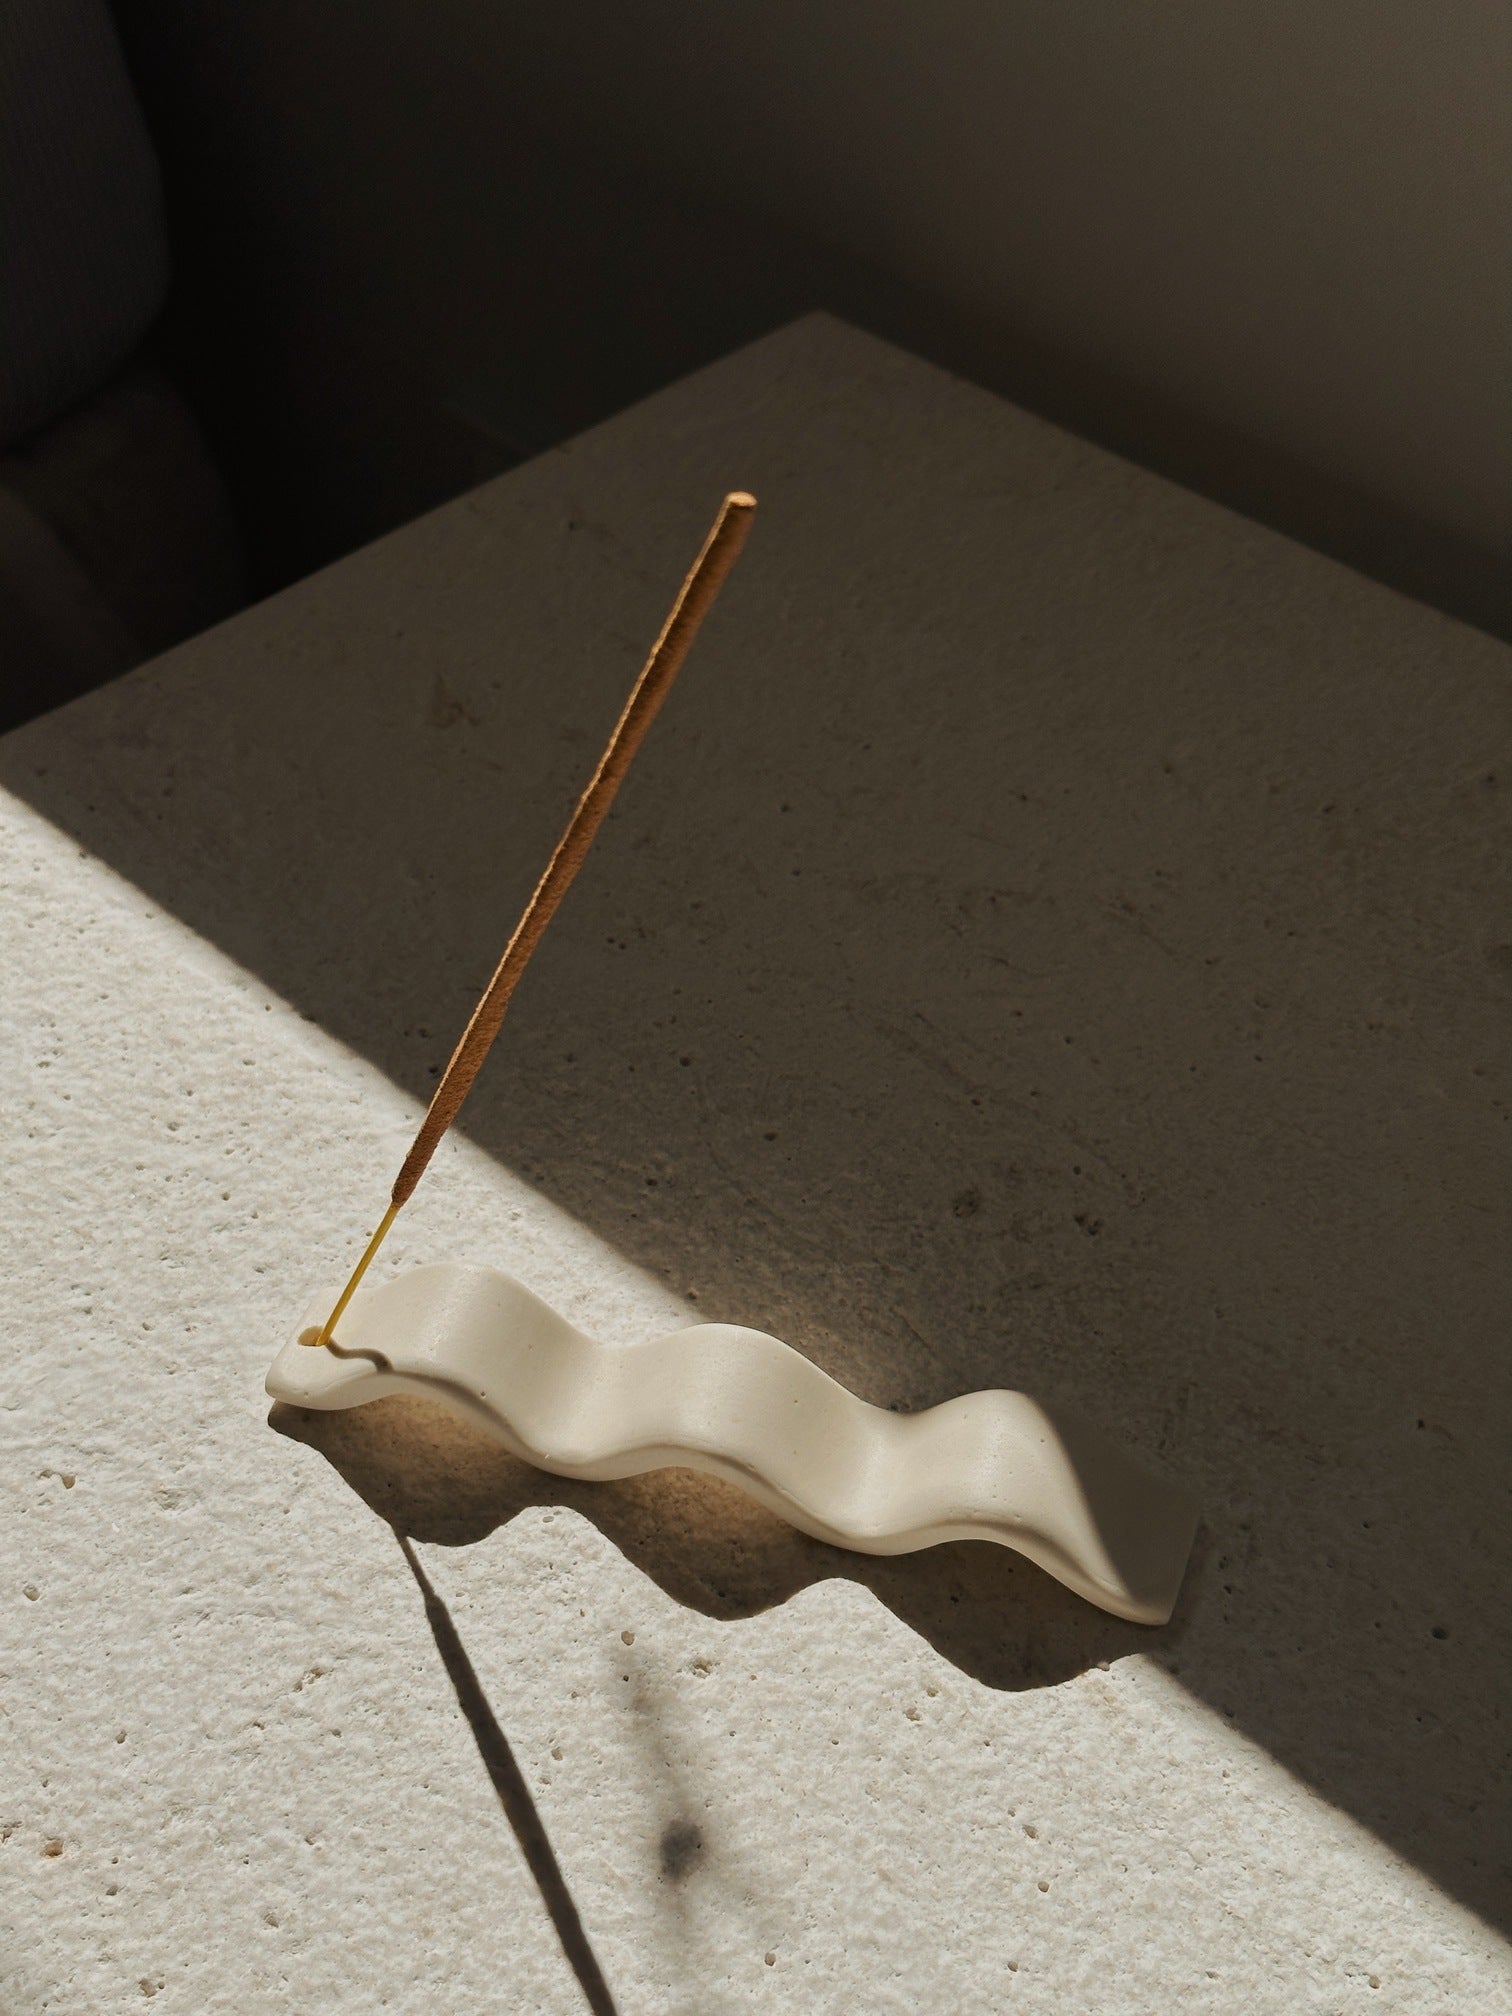 The Neo Incense Holder